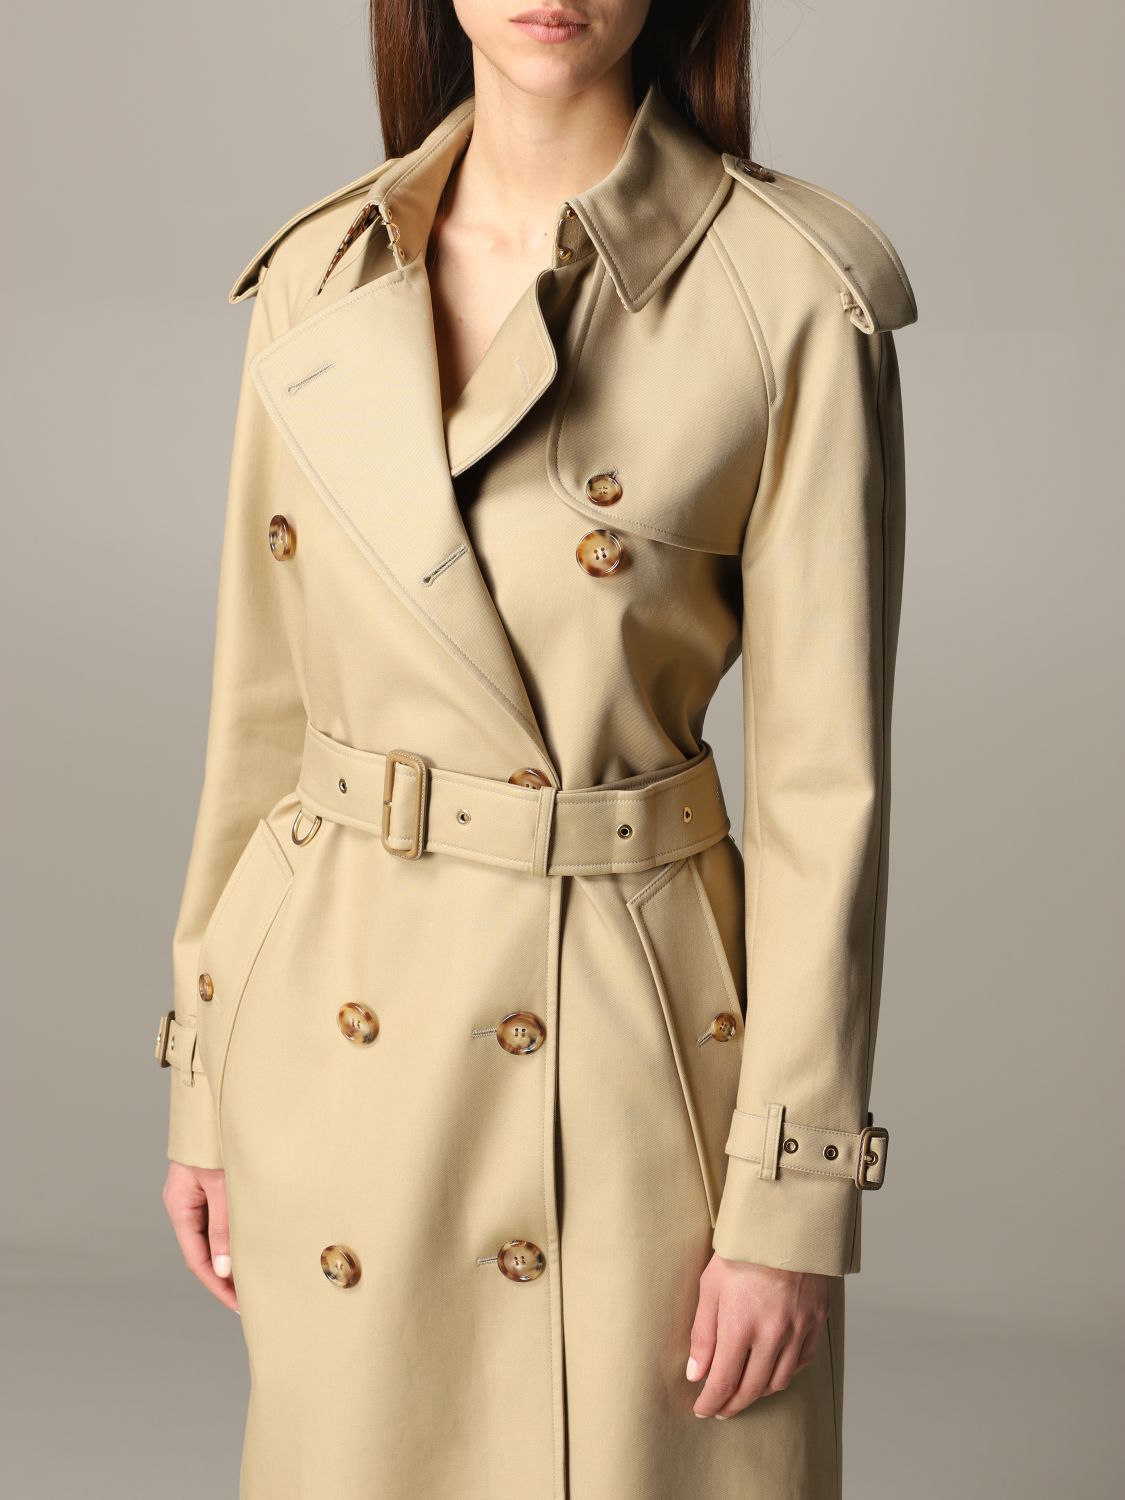 Burberry trench coat The Trench